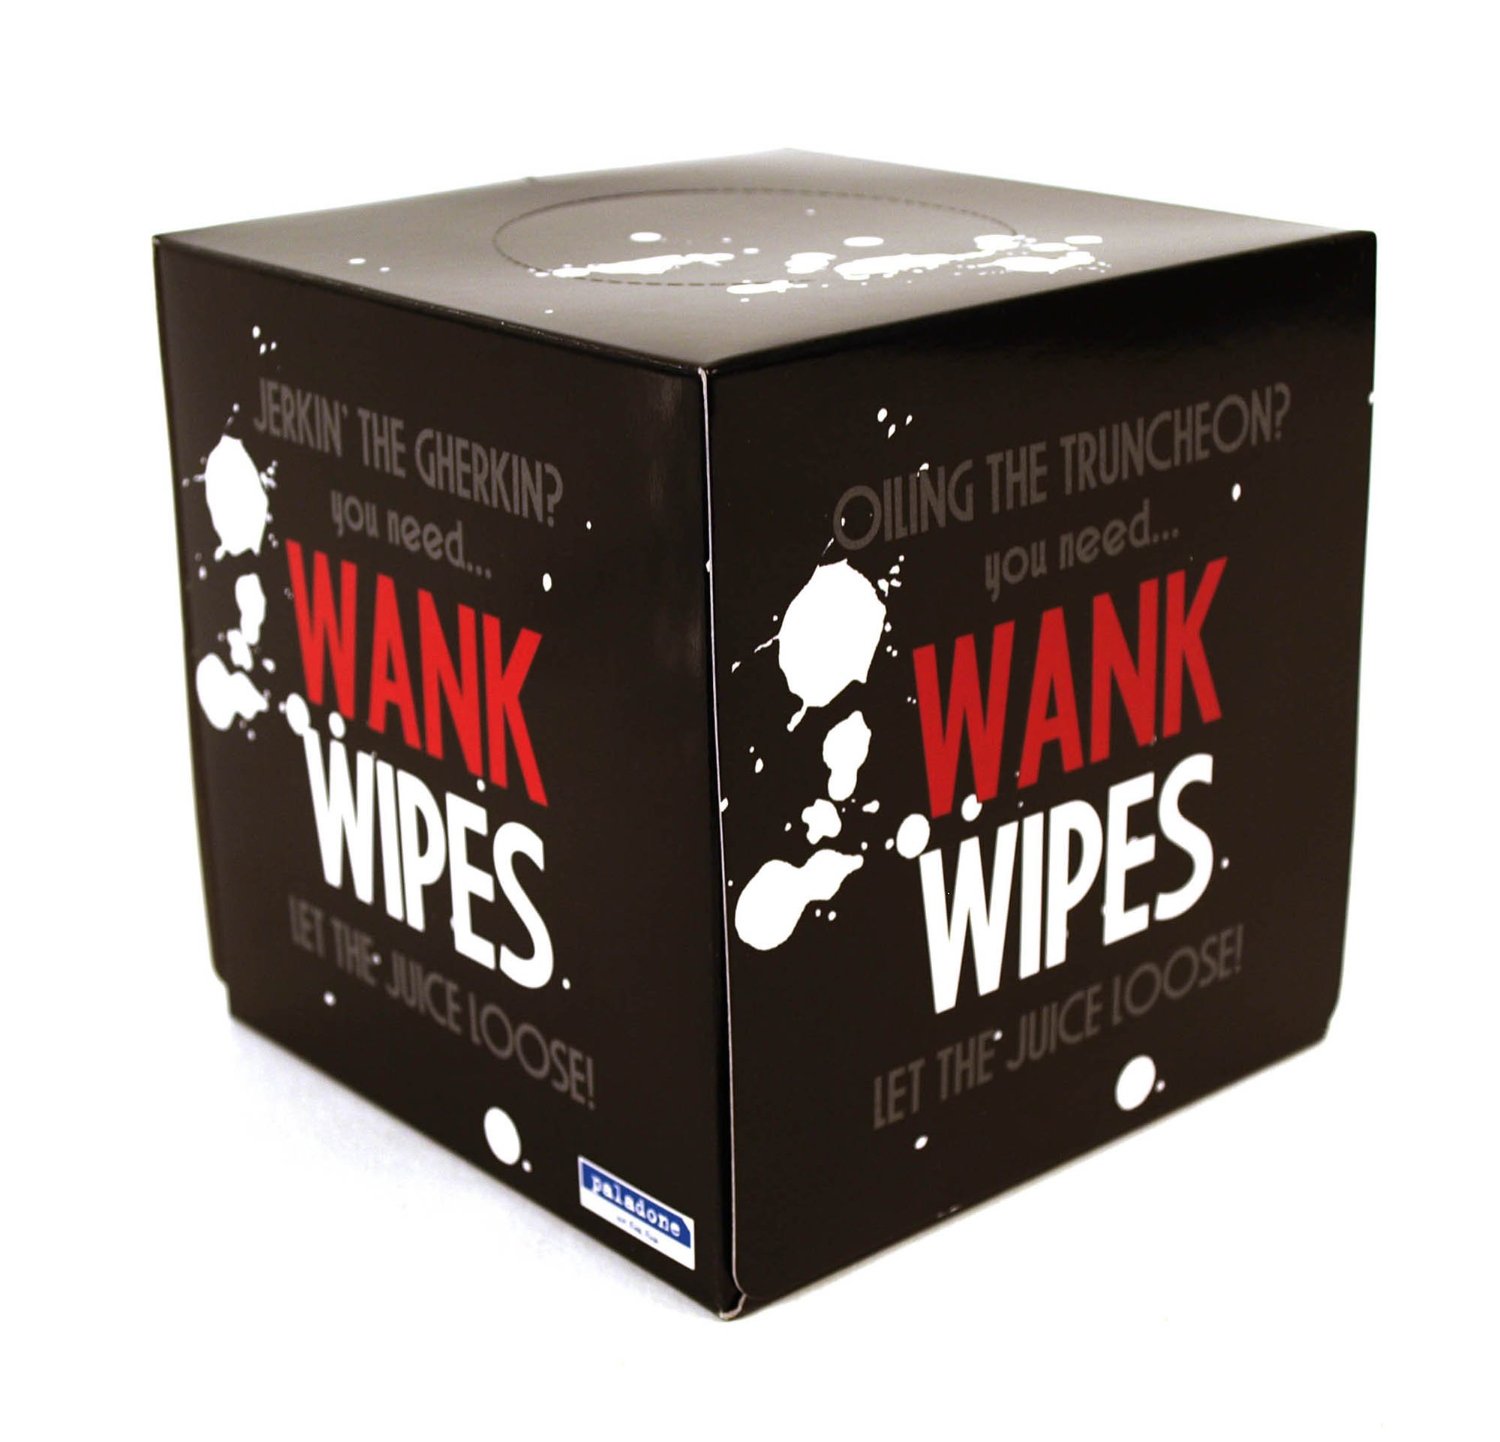 Wank Wipes – Let the juice loose!